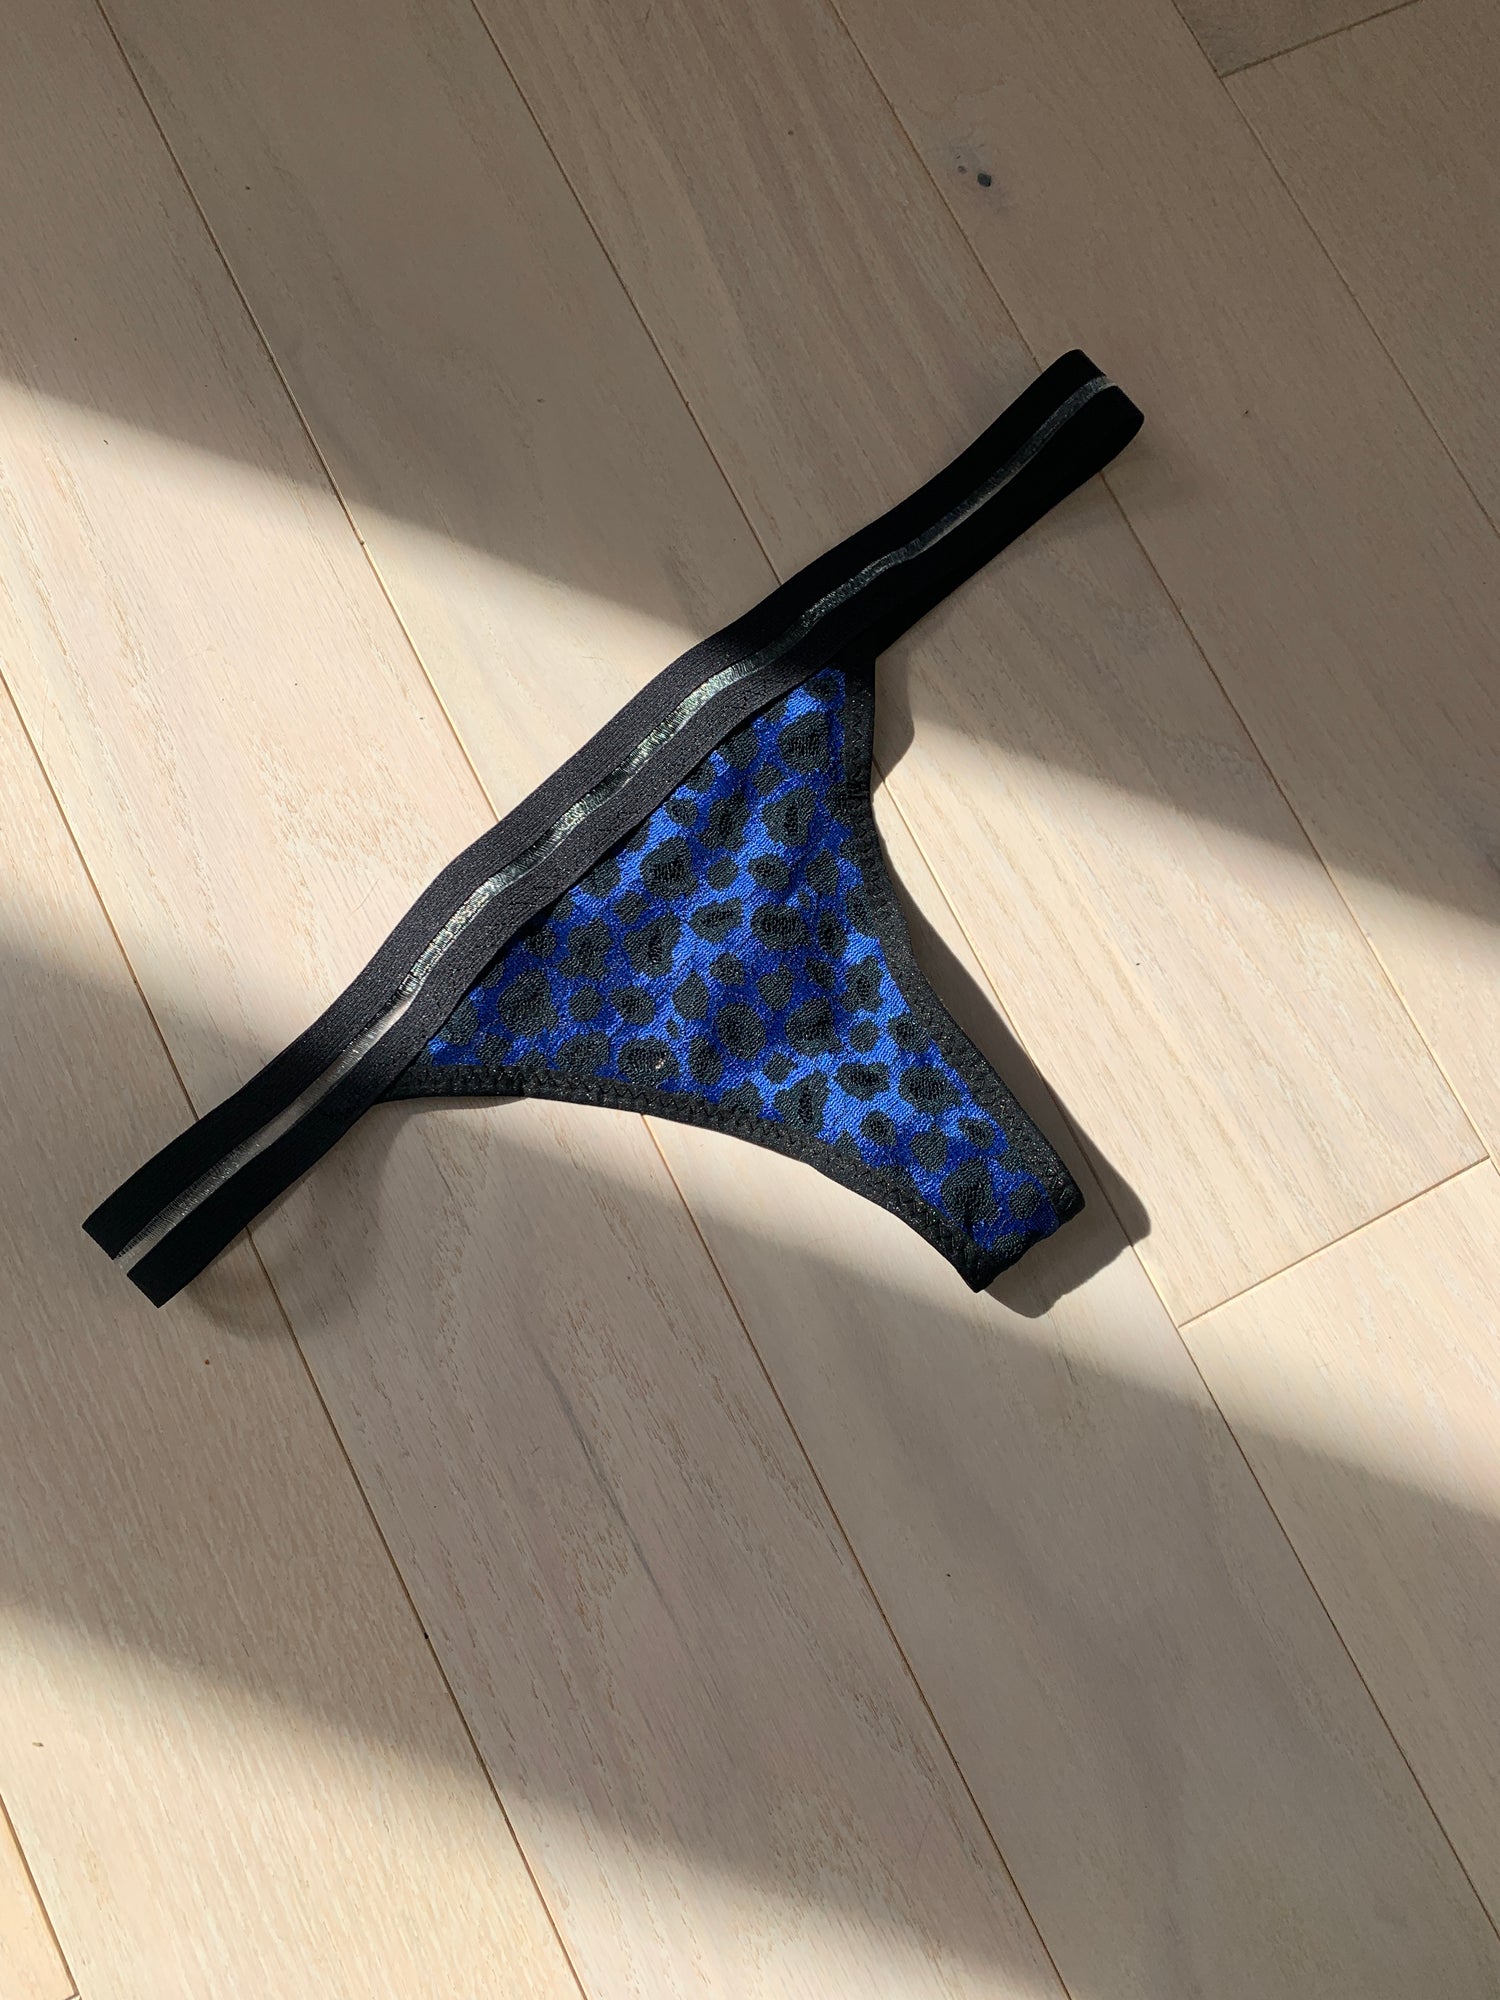 blue and black leopard undies against a wooden floor